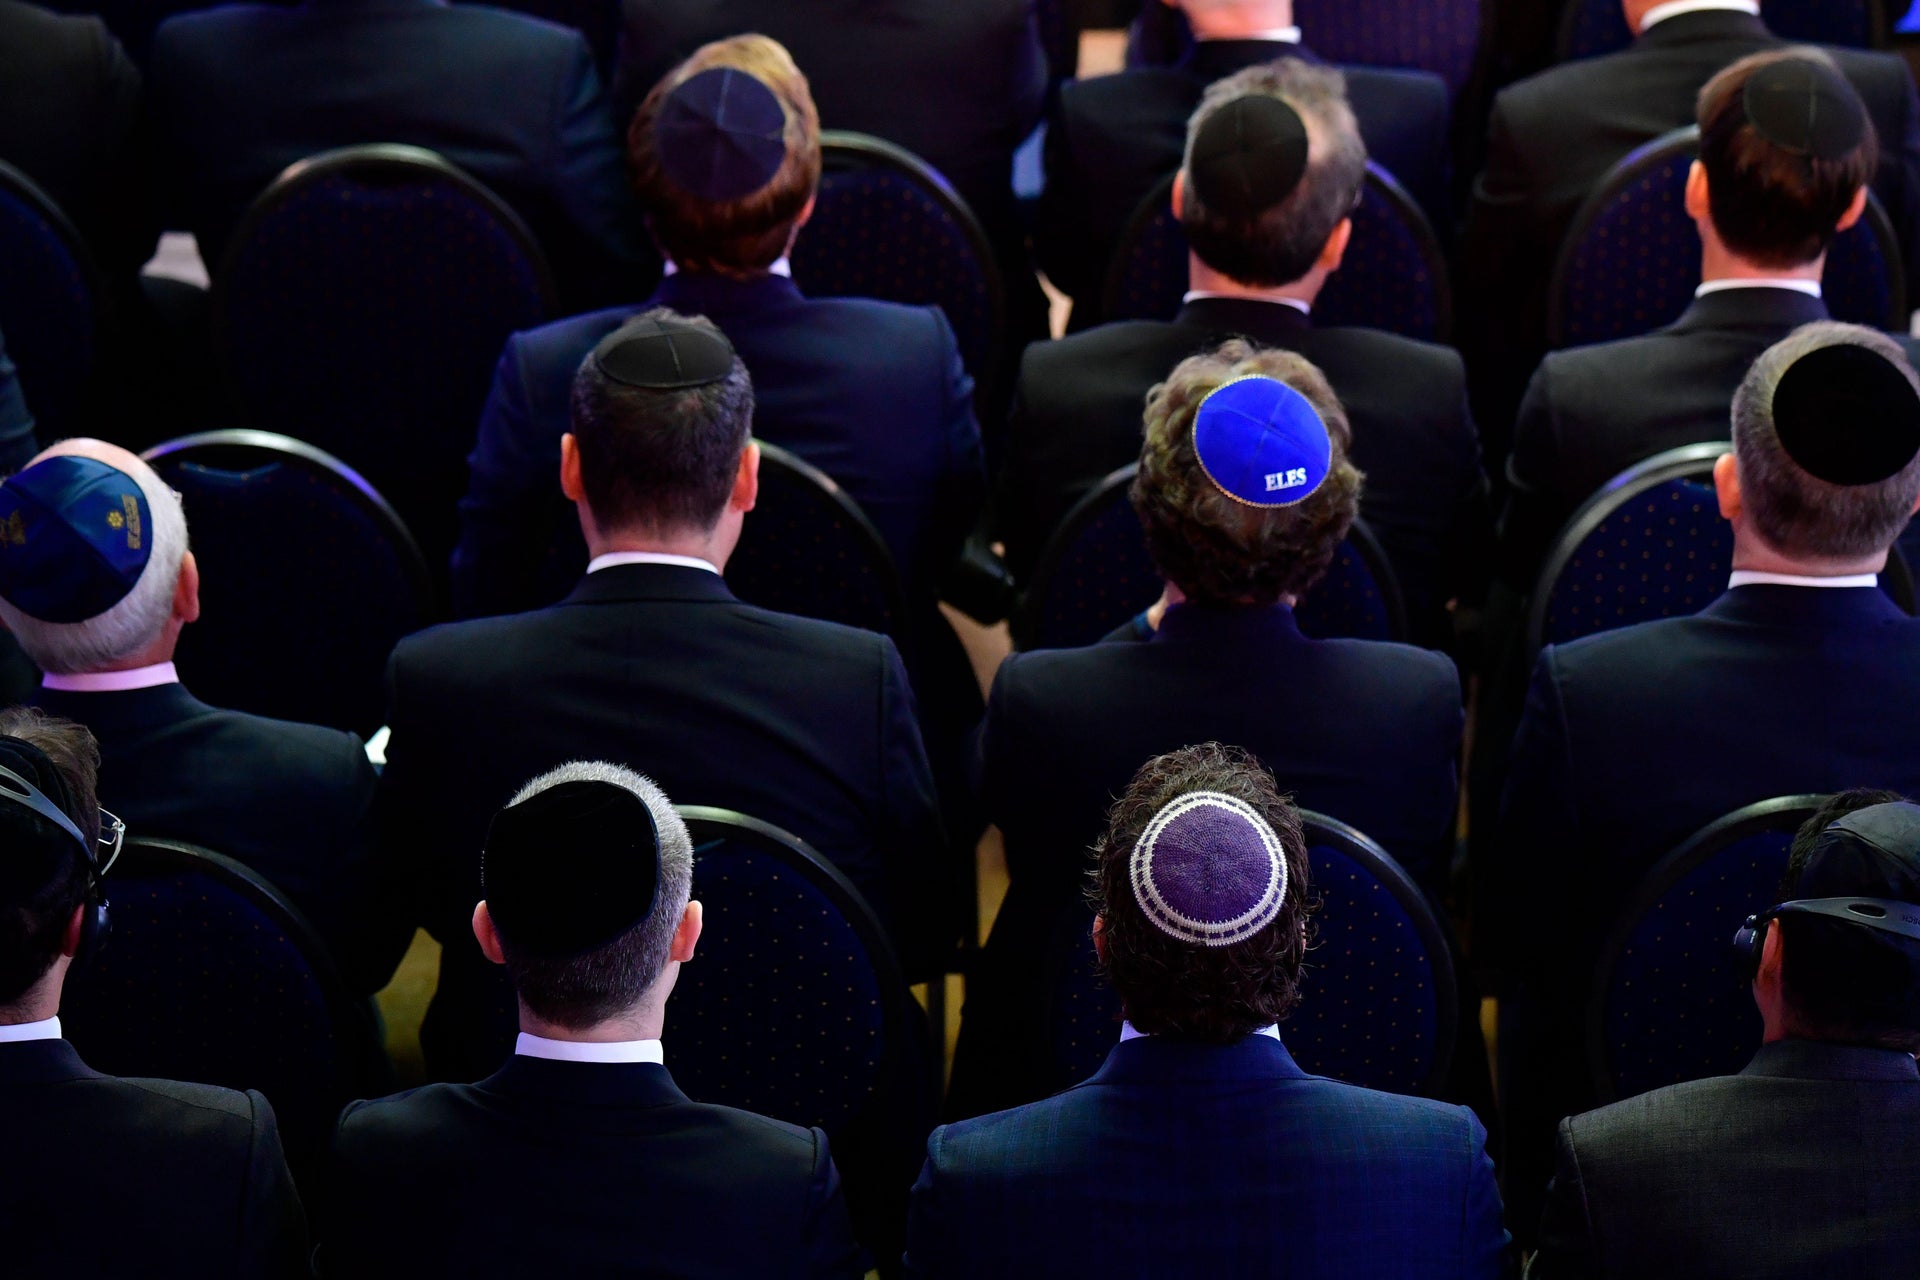 German Official Warns Jews Against Wearing Kippah In Public Due To 